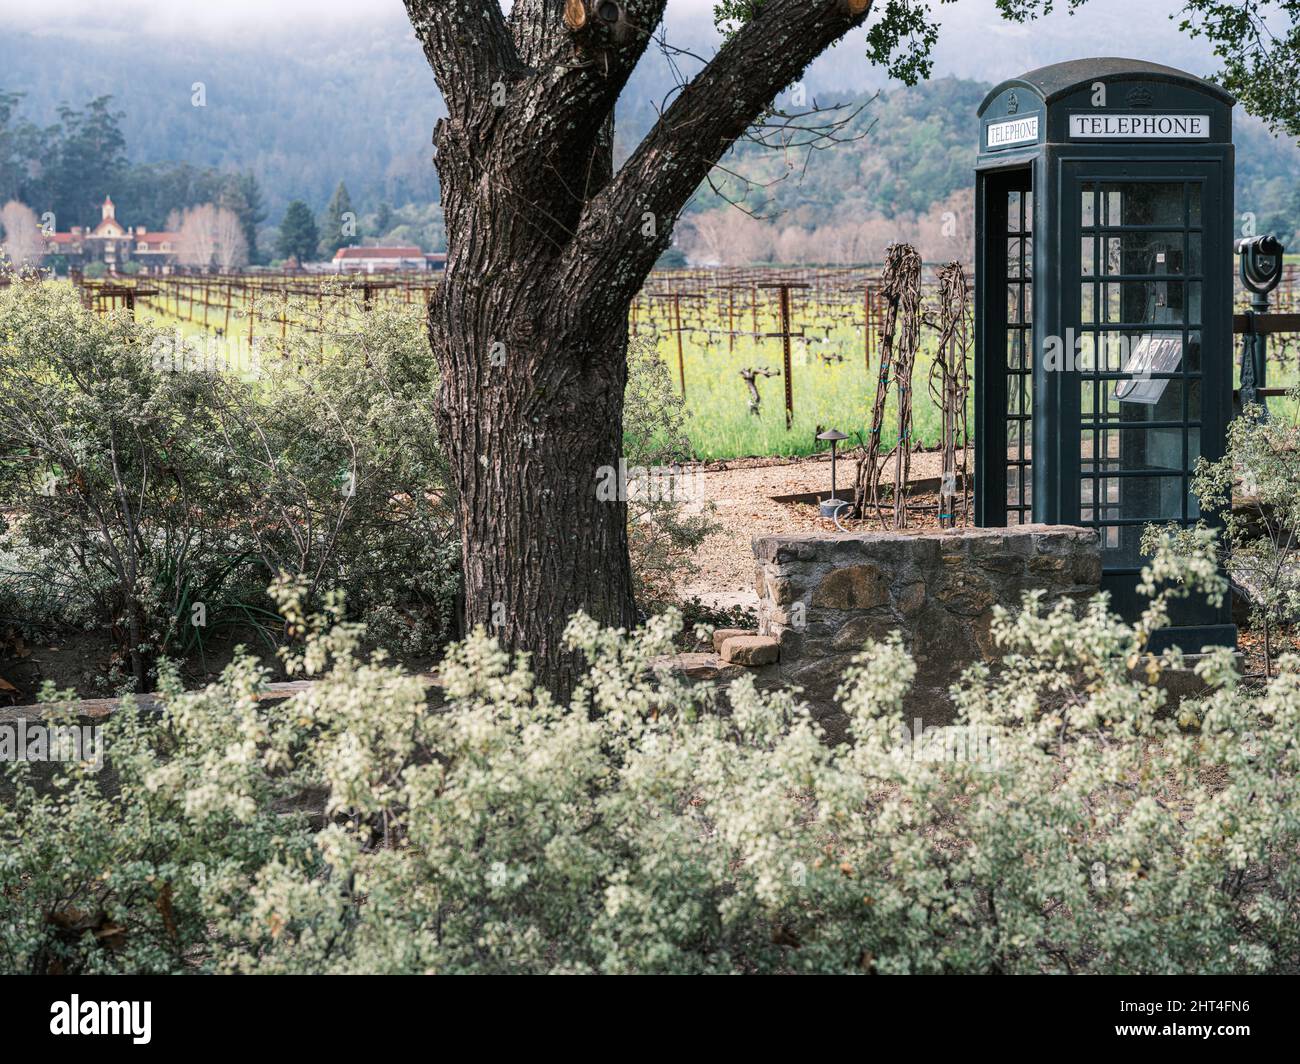 A picturesque vineyard setting with an old fashioned telephone box, Napa Valley, California. Stock Photo